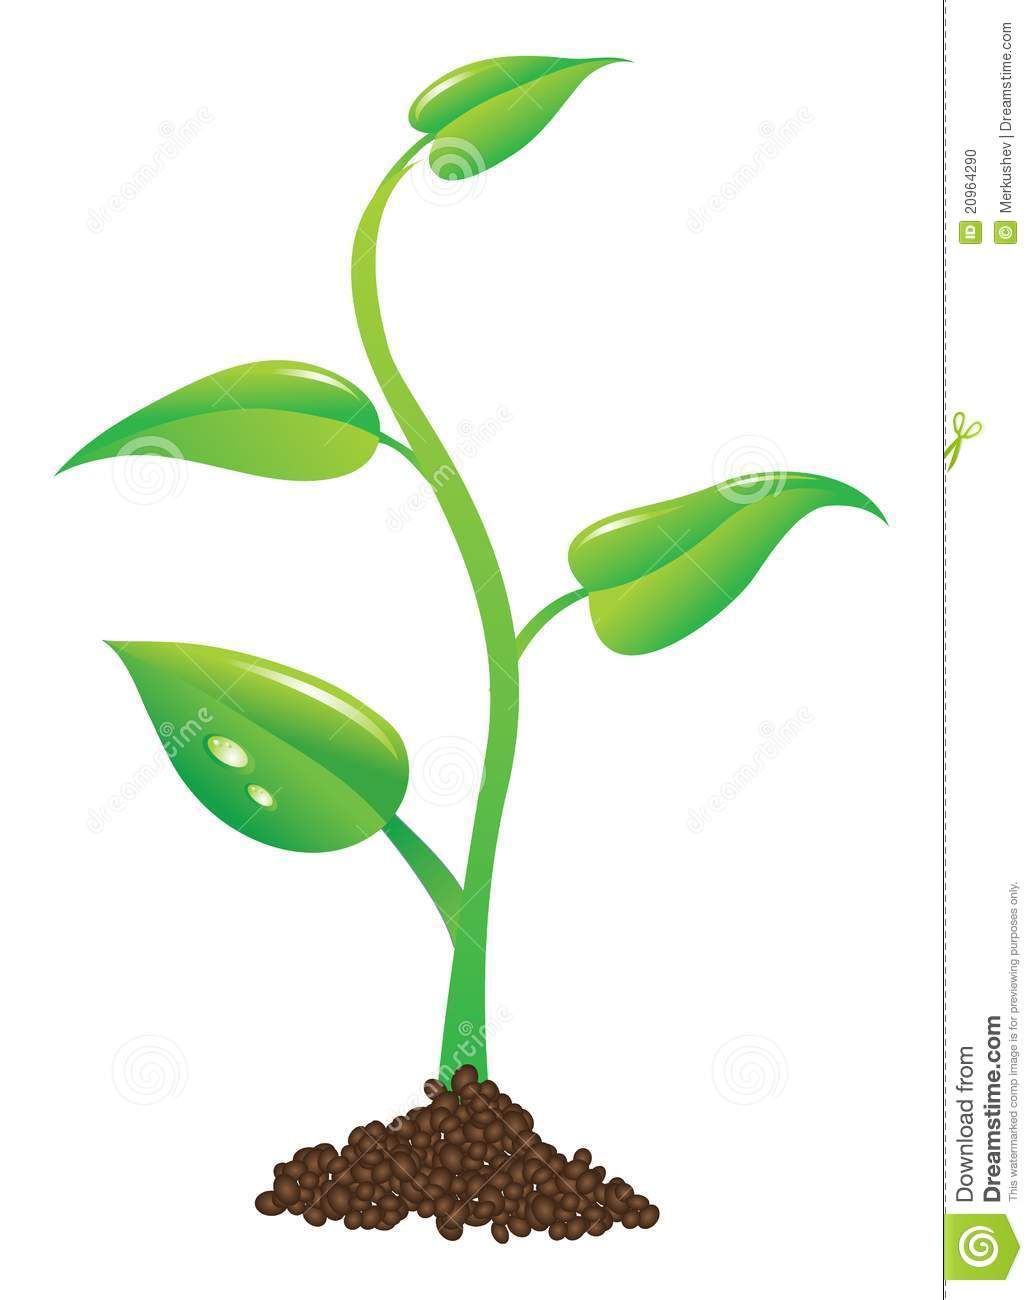 Plant google search paddle. Planting clipart sprout